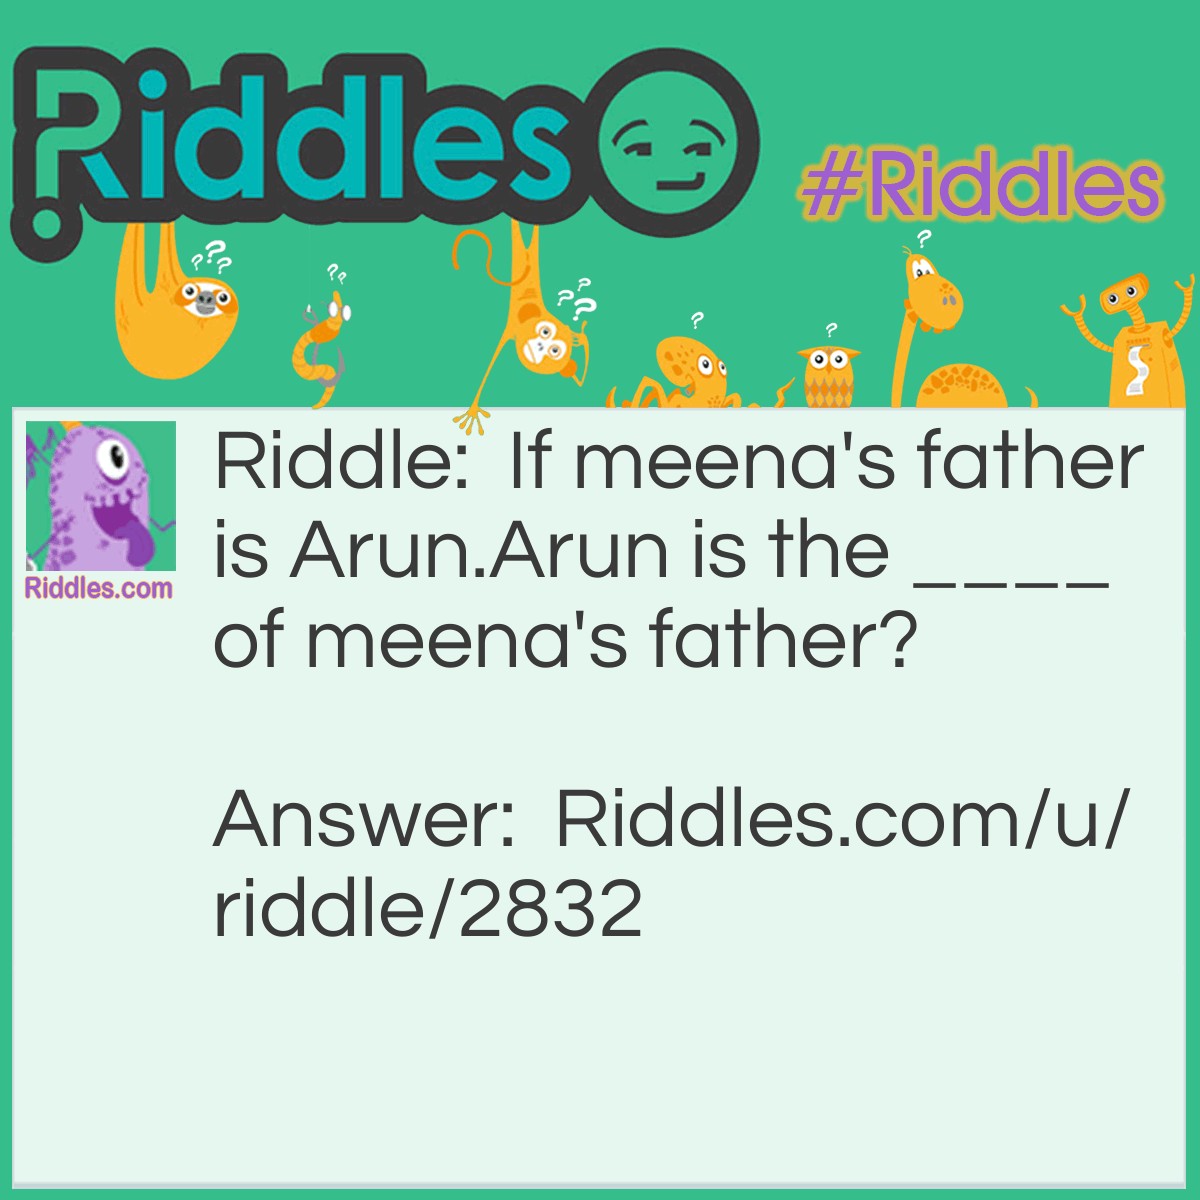 Riddle: If meena's father is Arun.
Arun is the ____ of meena's father? Answer: Name.